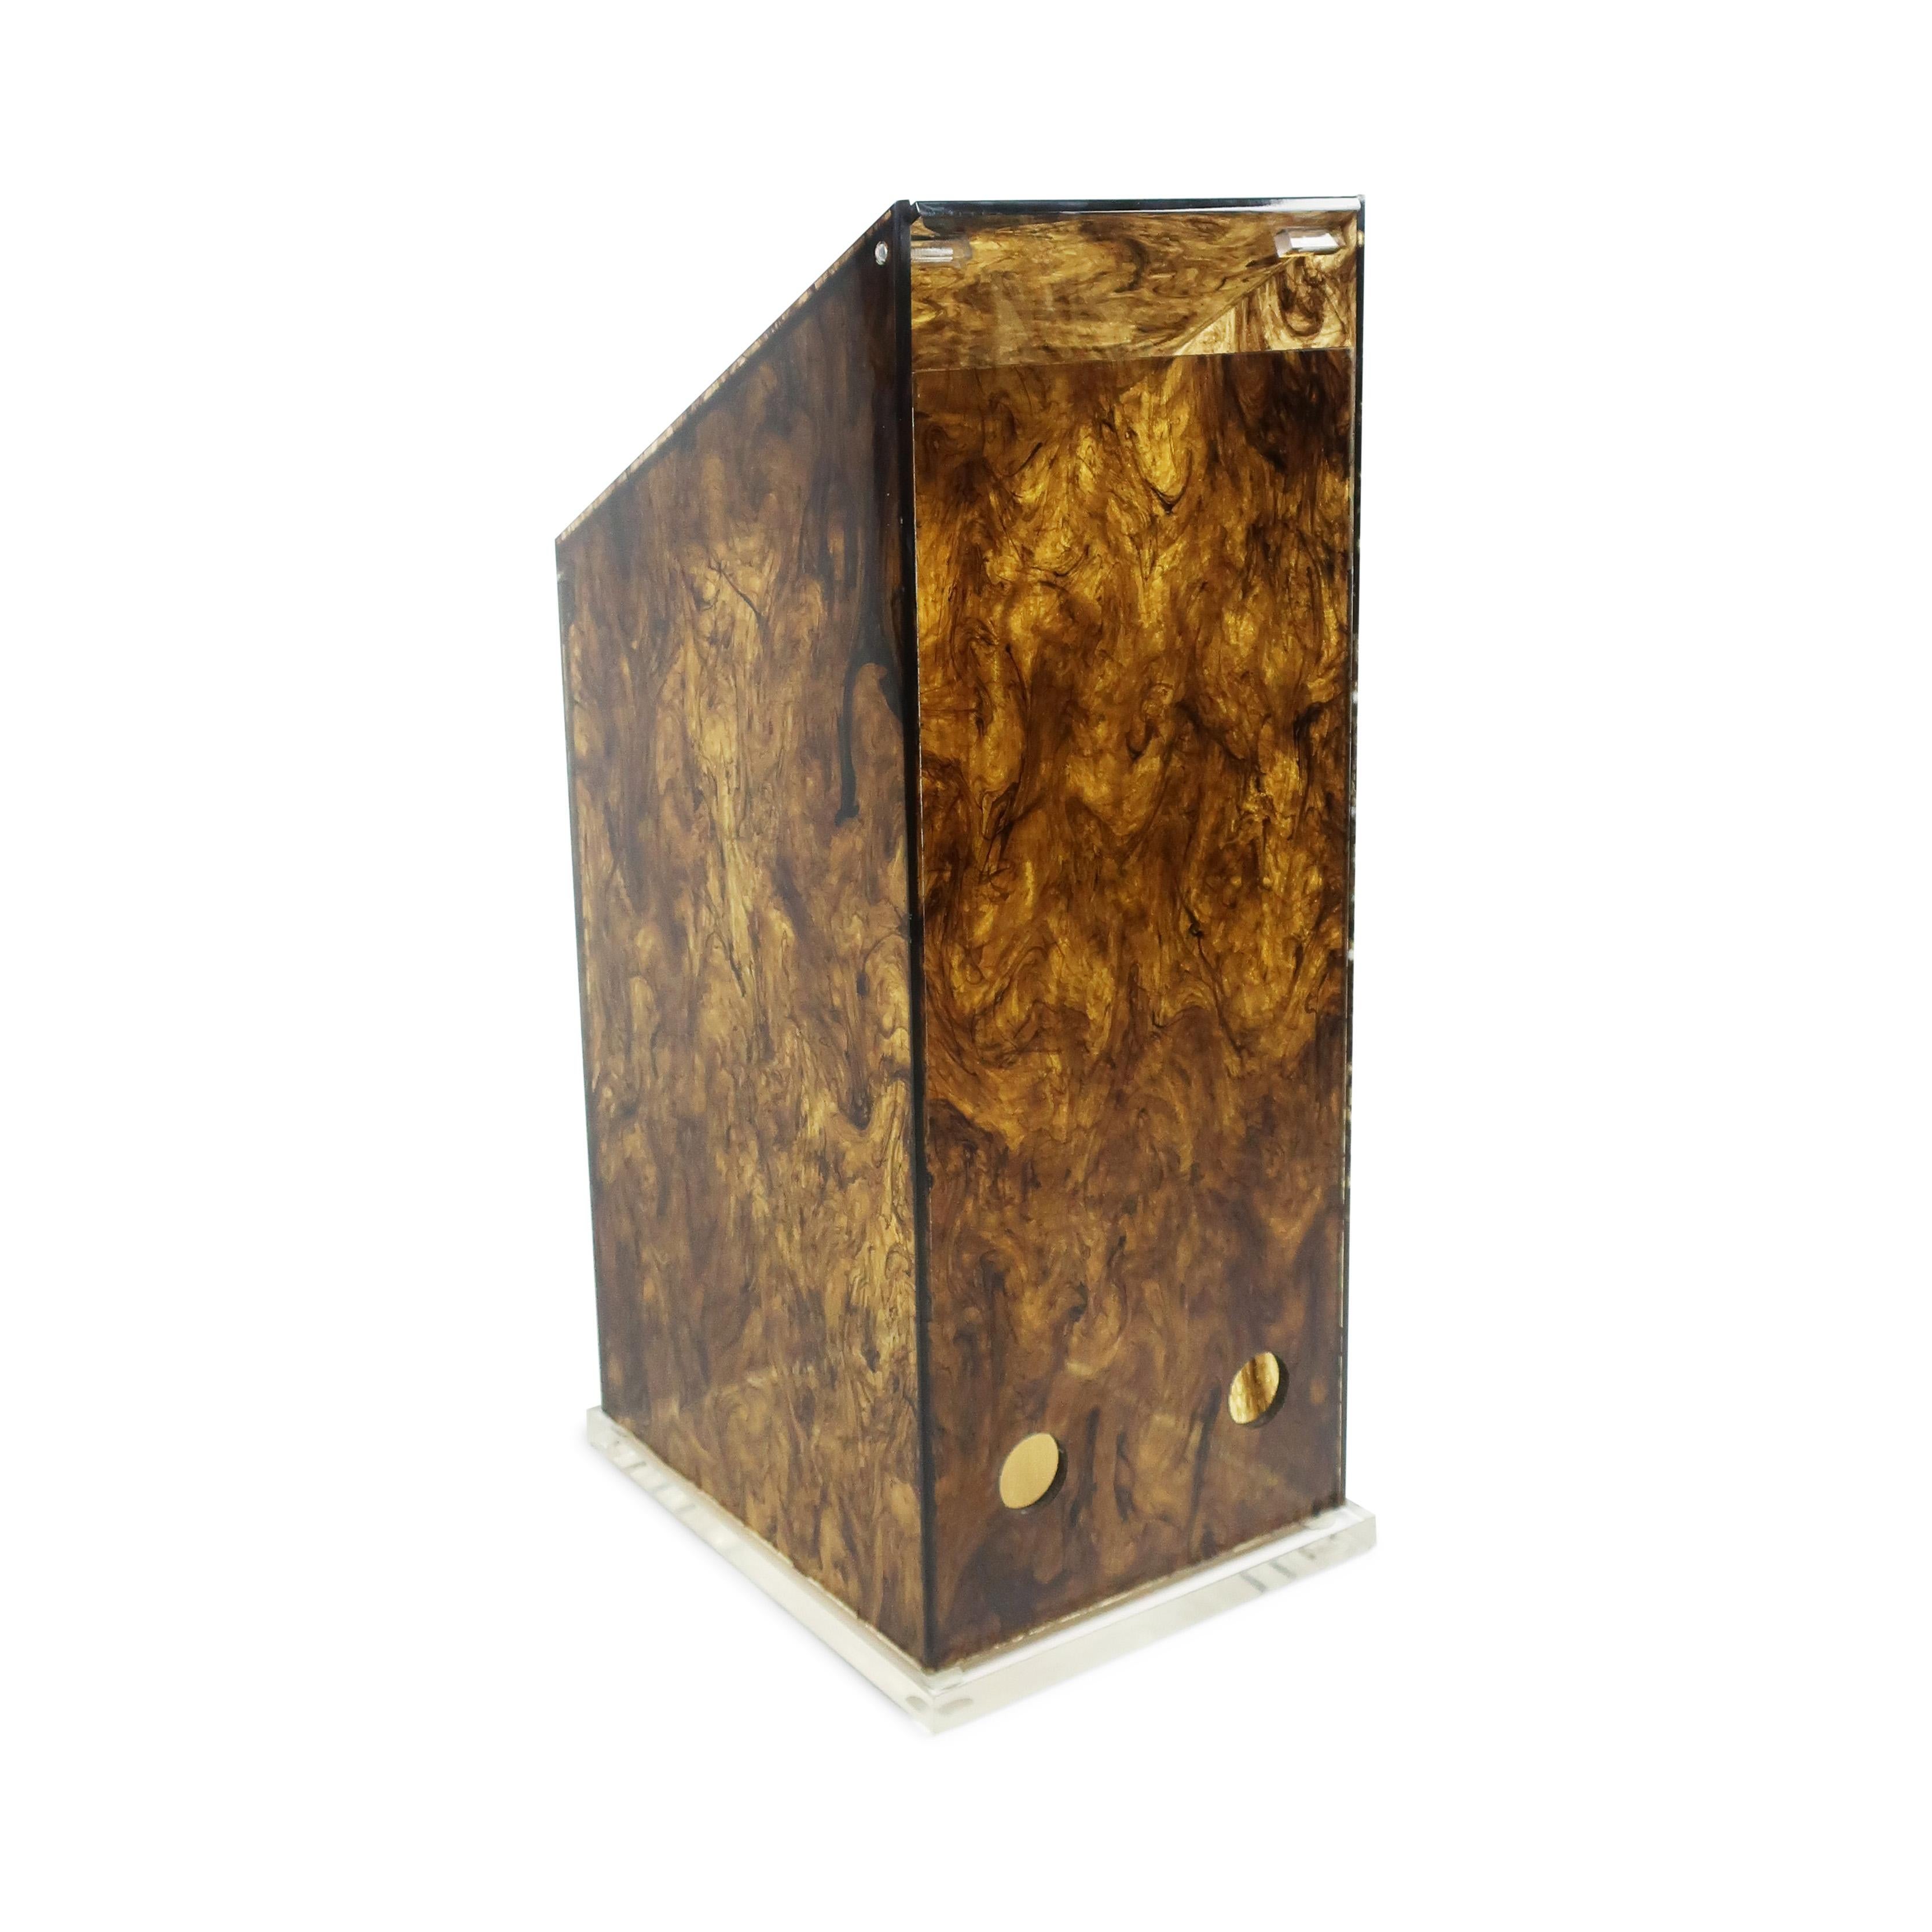 Vintage Tortoiseshell Lucite Storage In Good Condition For Sale In Brooklyn, NY